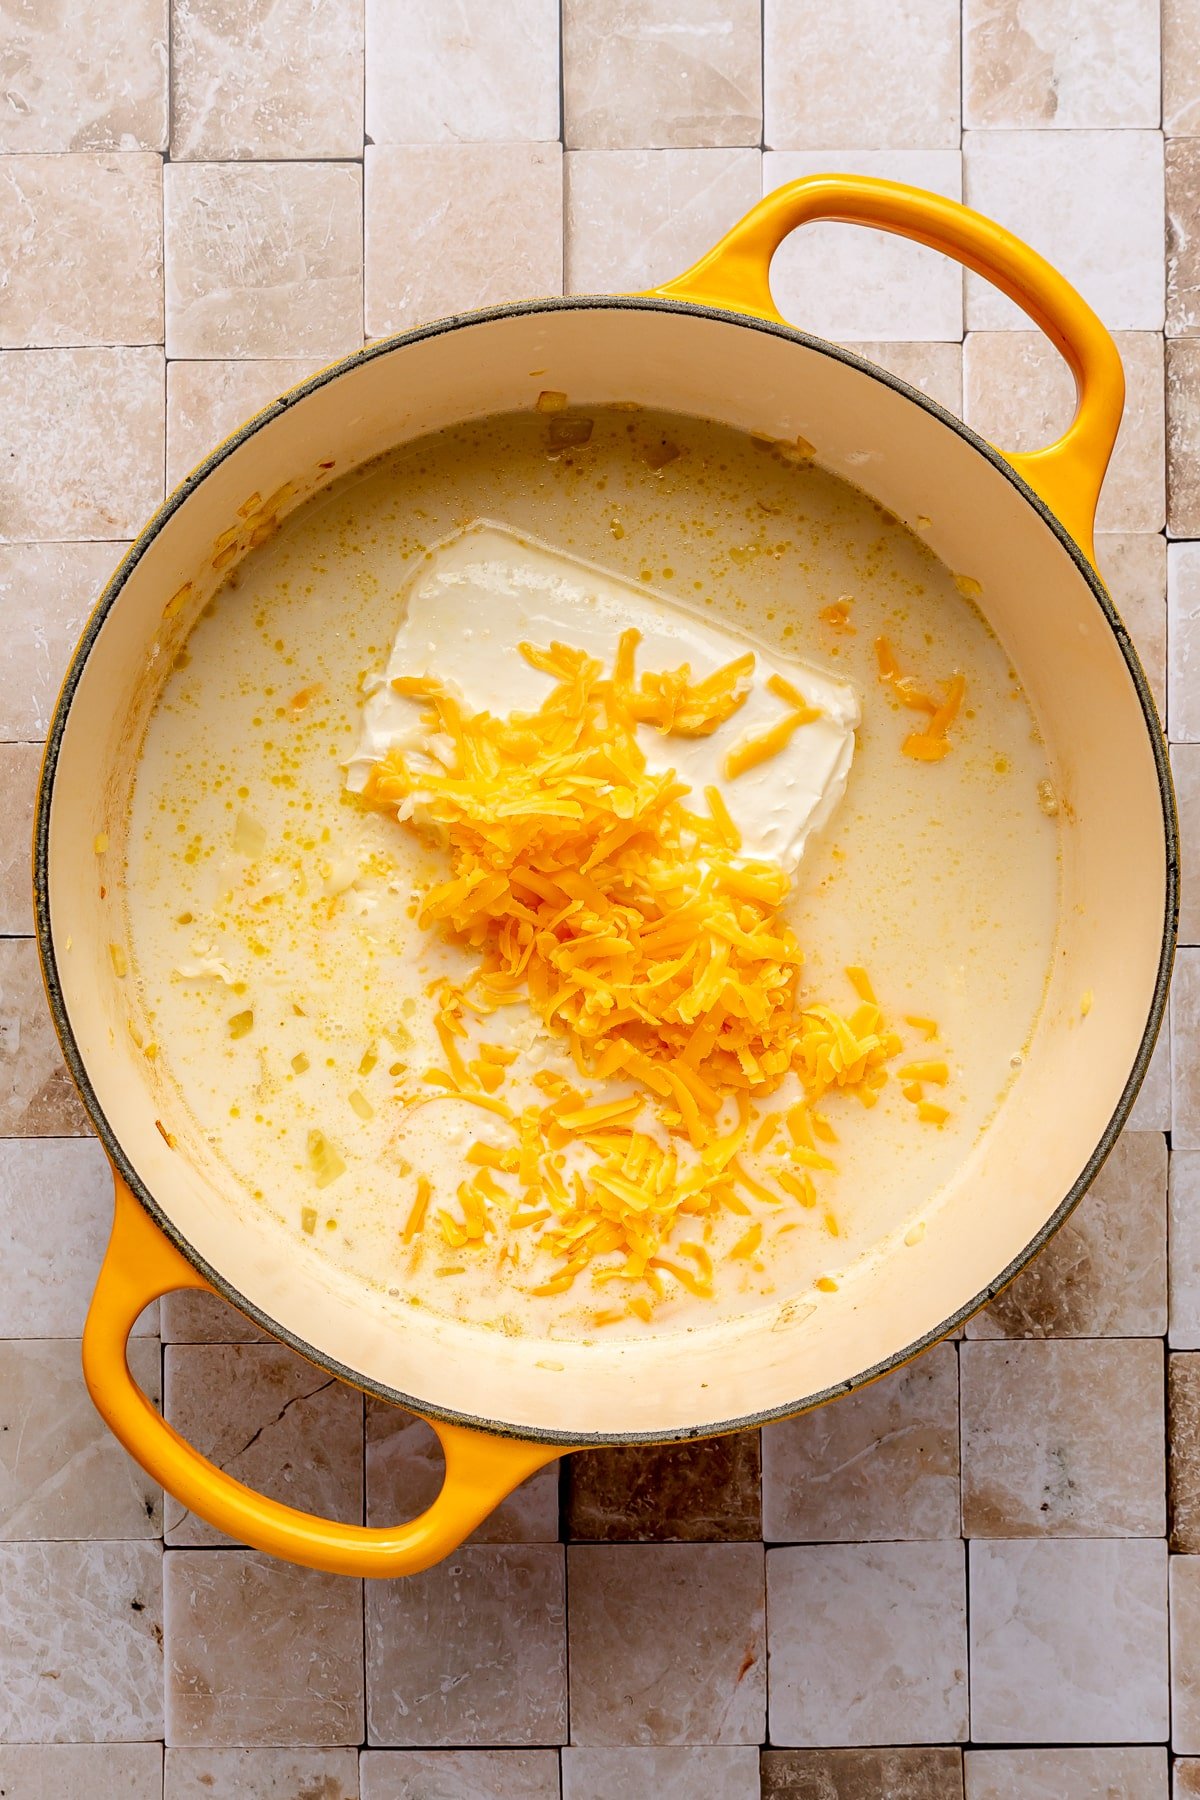 Shredded cheddar cheese, a block of cream cheese, and a cream colored liquid have been added to the pot.